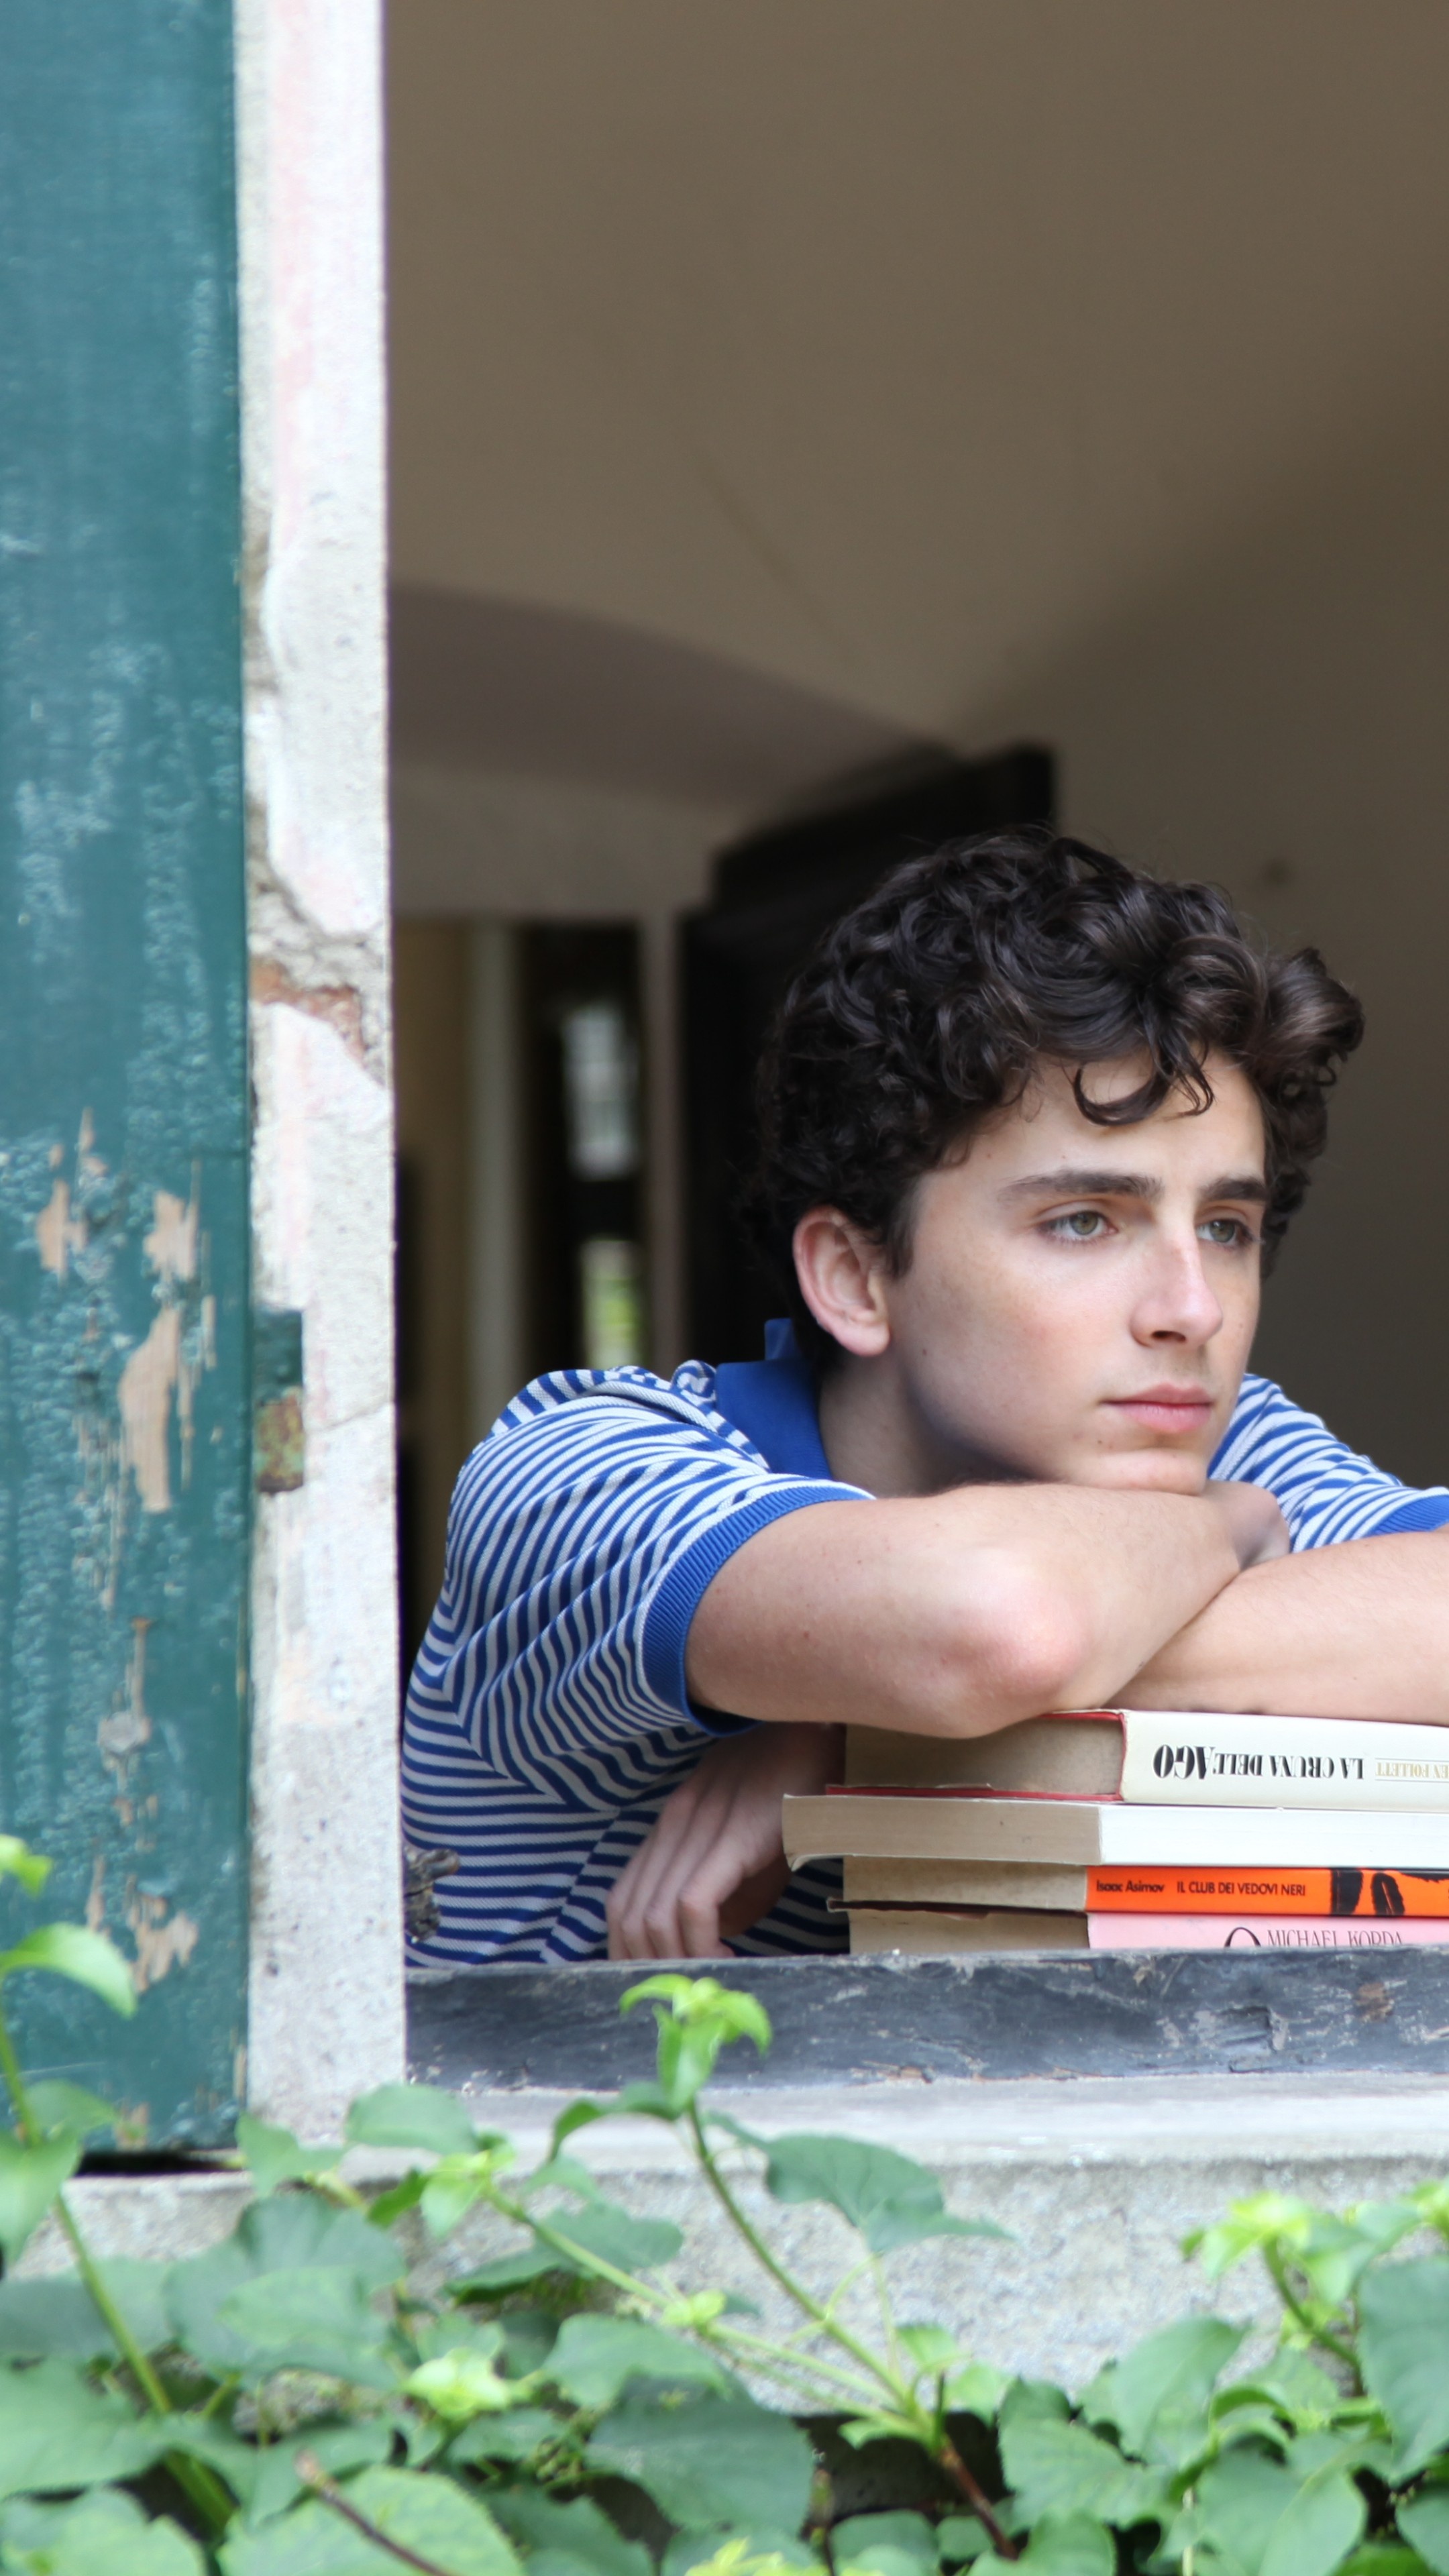 Call Me by Your Name, Timothee Chalamet, Artistic movie still, Emotional tale, 2160x3840 4K Handy